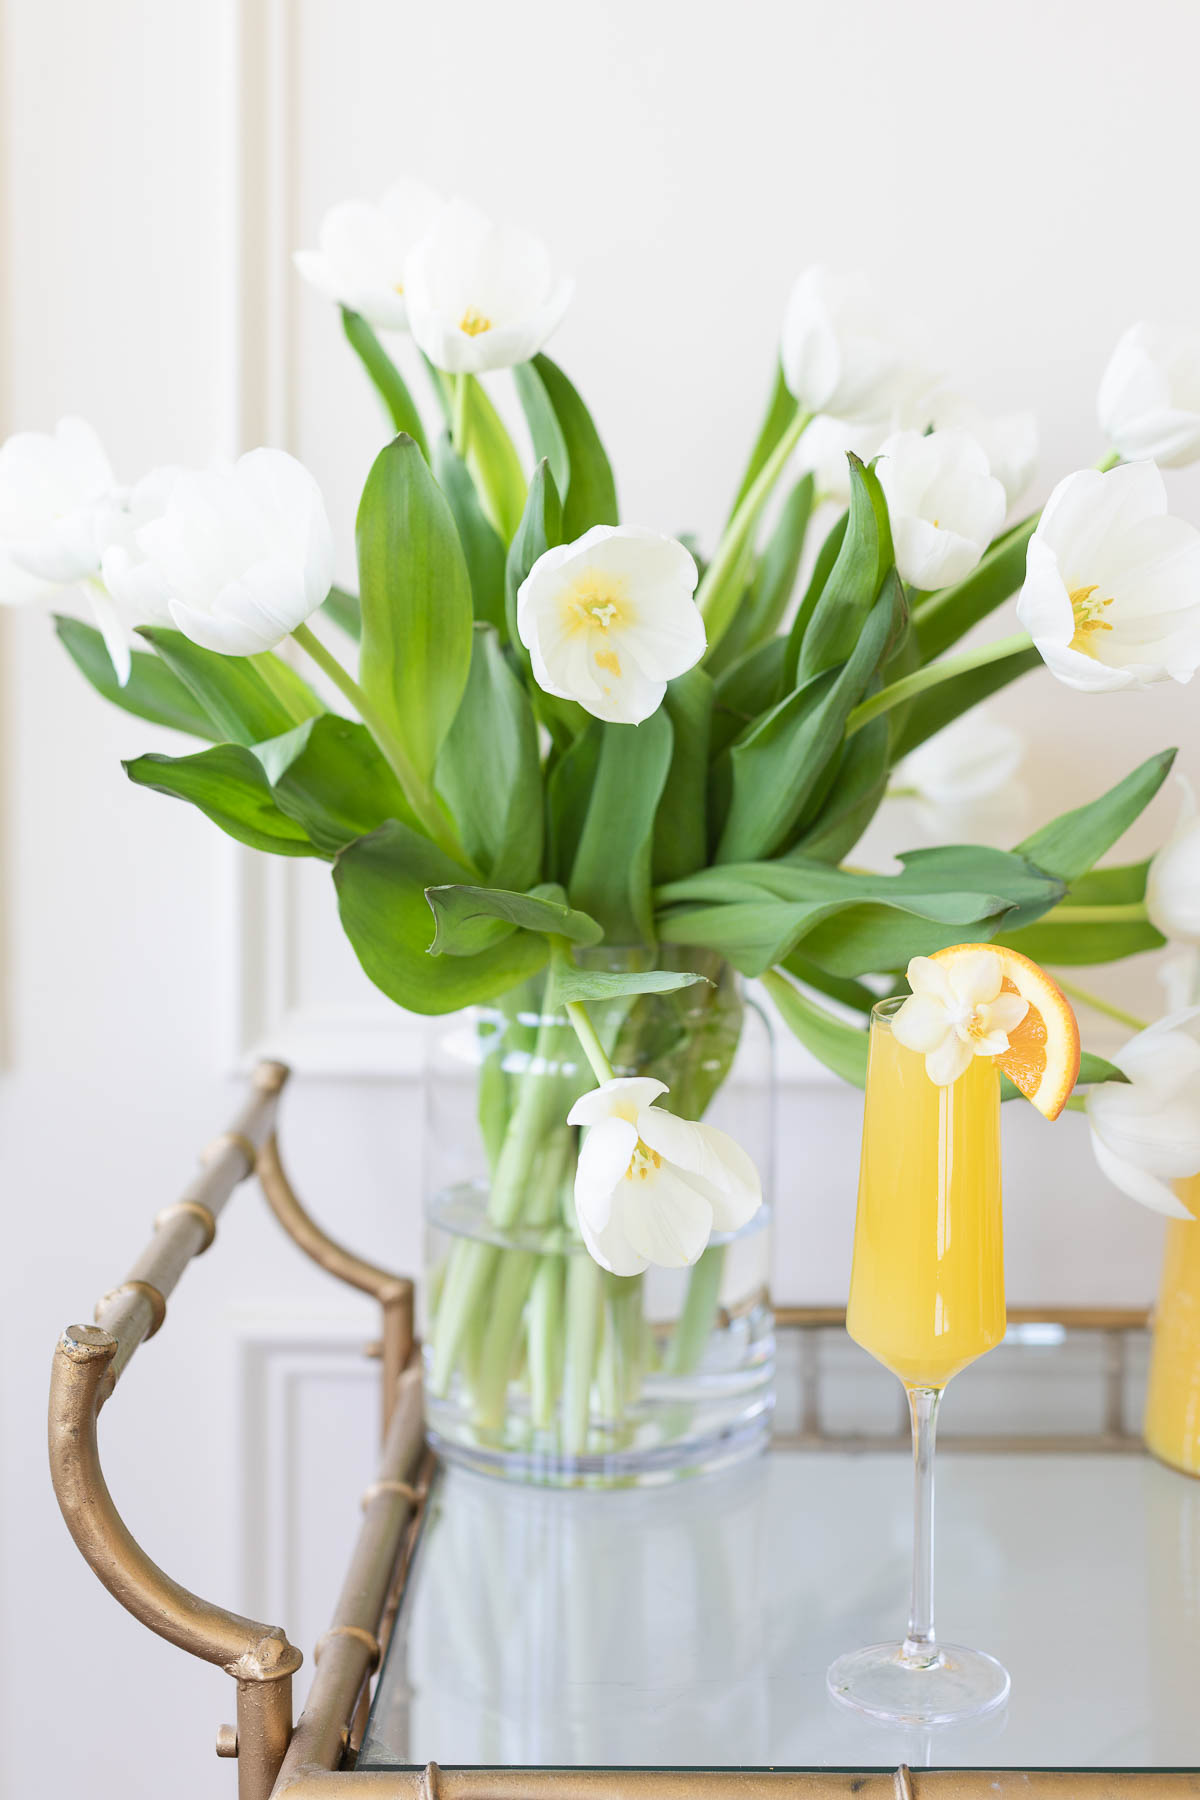 A glass of orange juice on a tray with white tulips and Easter side dishes.